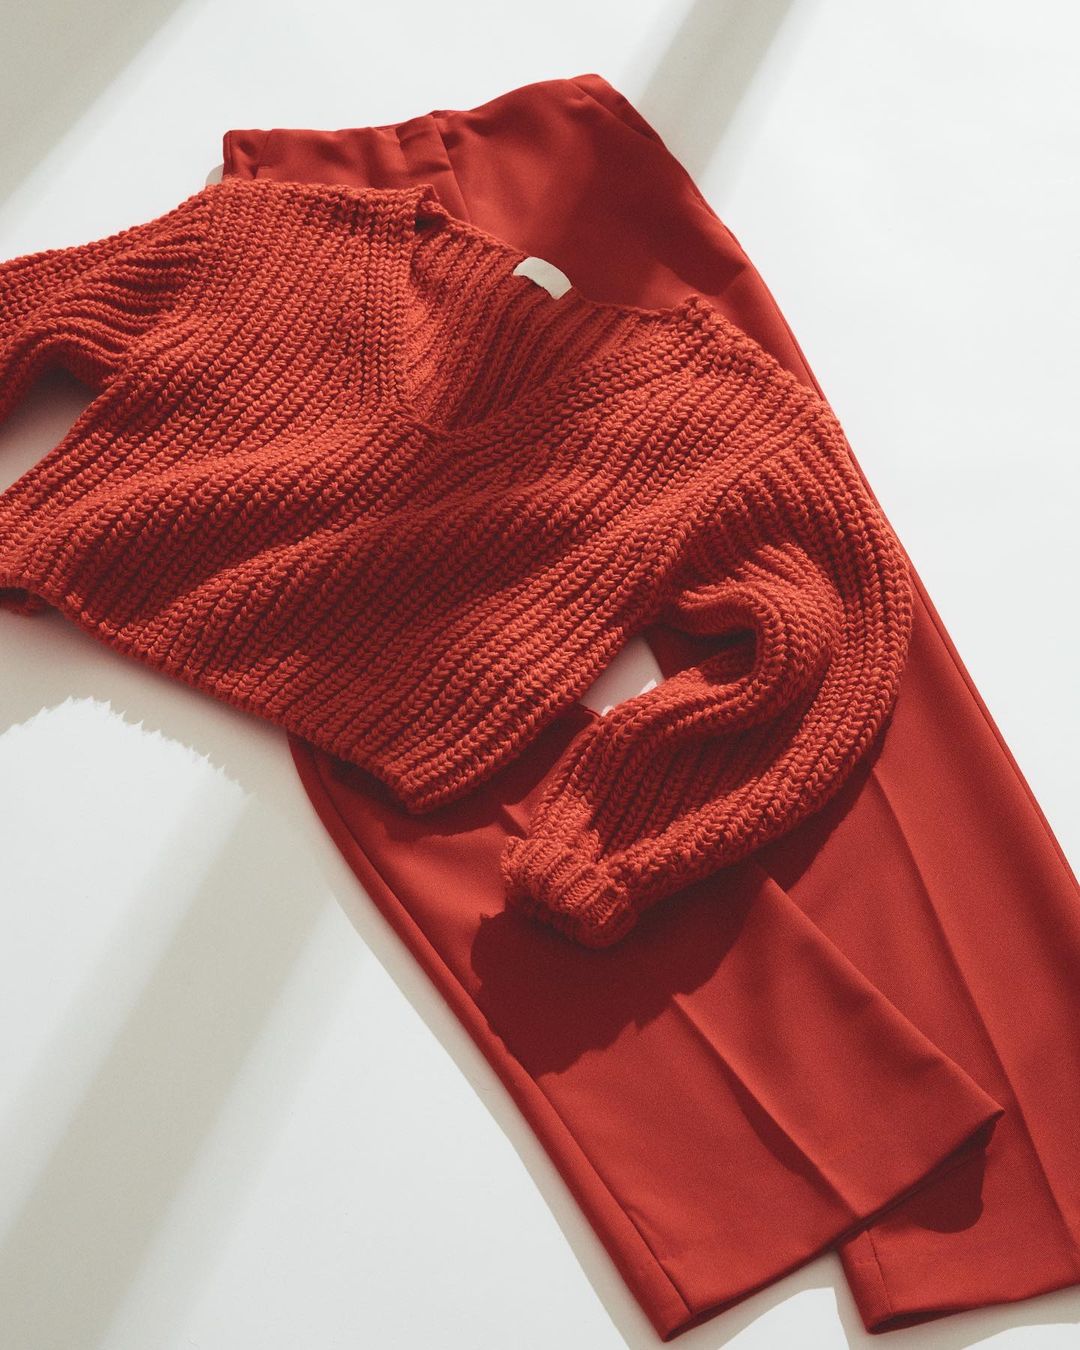 A red sweater and pants laid out on a flat surface.